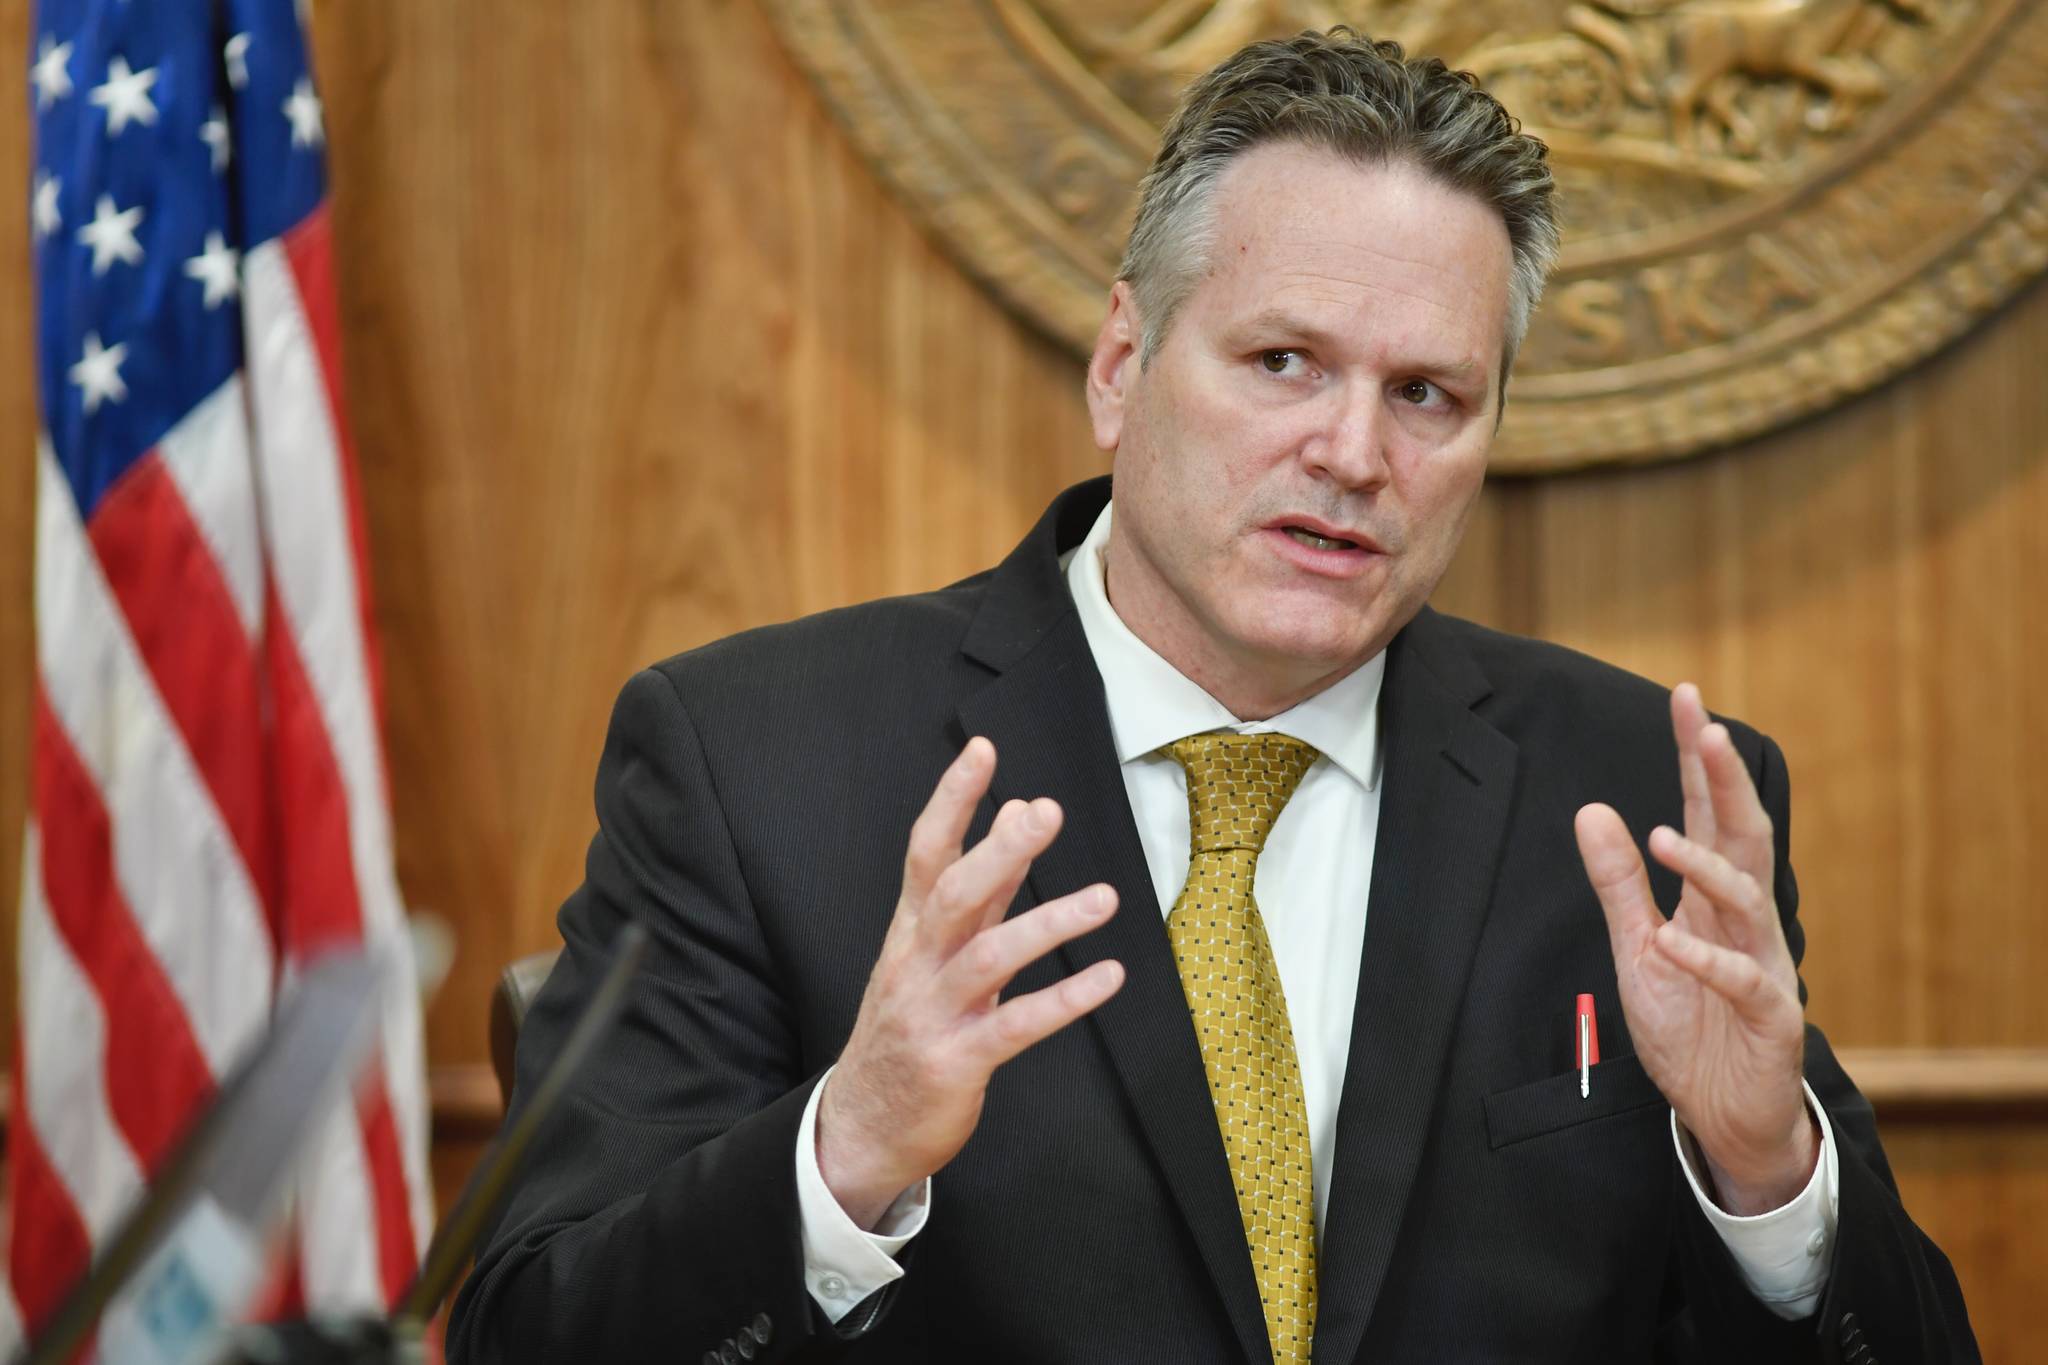 Support or oppose? A statewide poll shows what some Alaskans think about Dunleavy’s budget